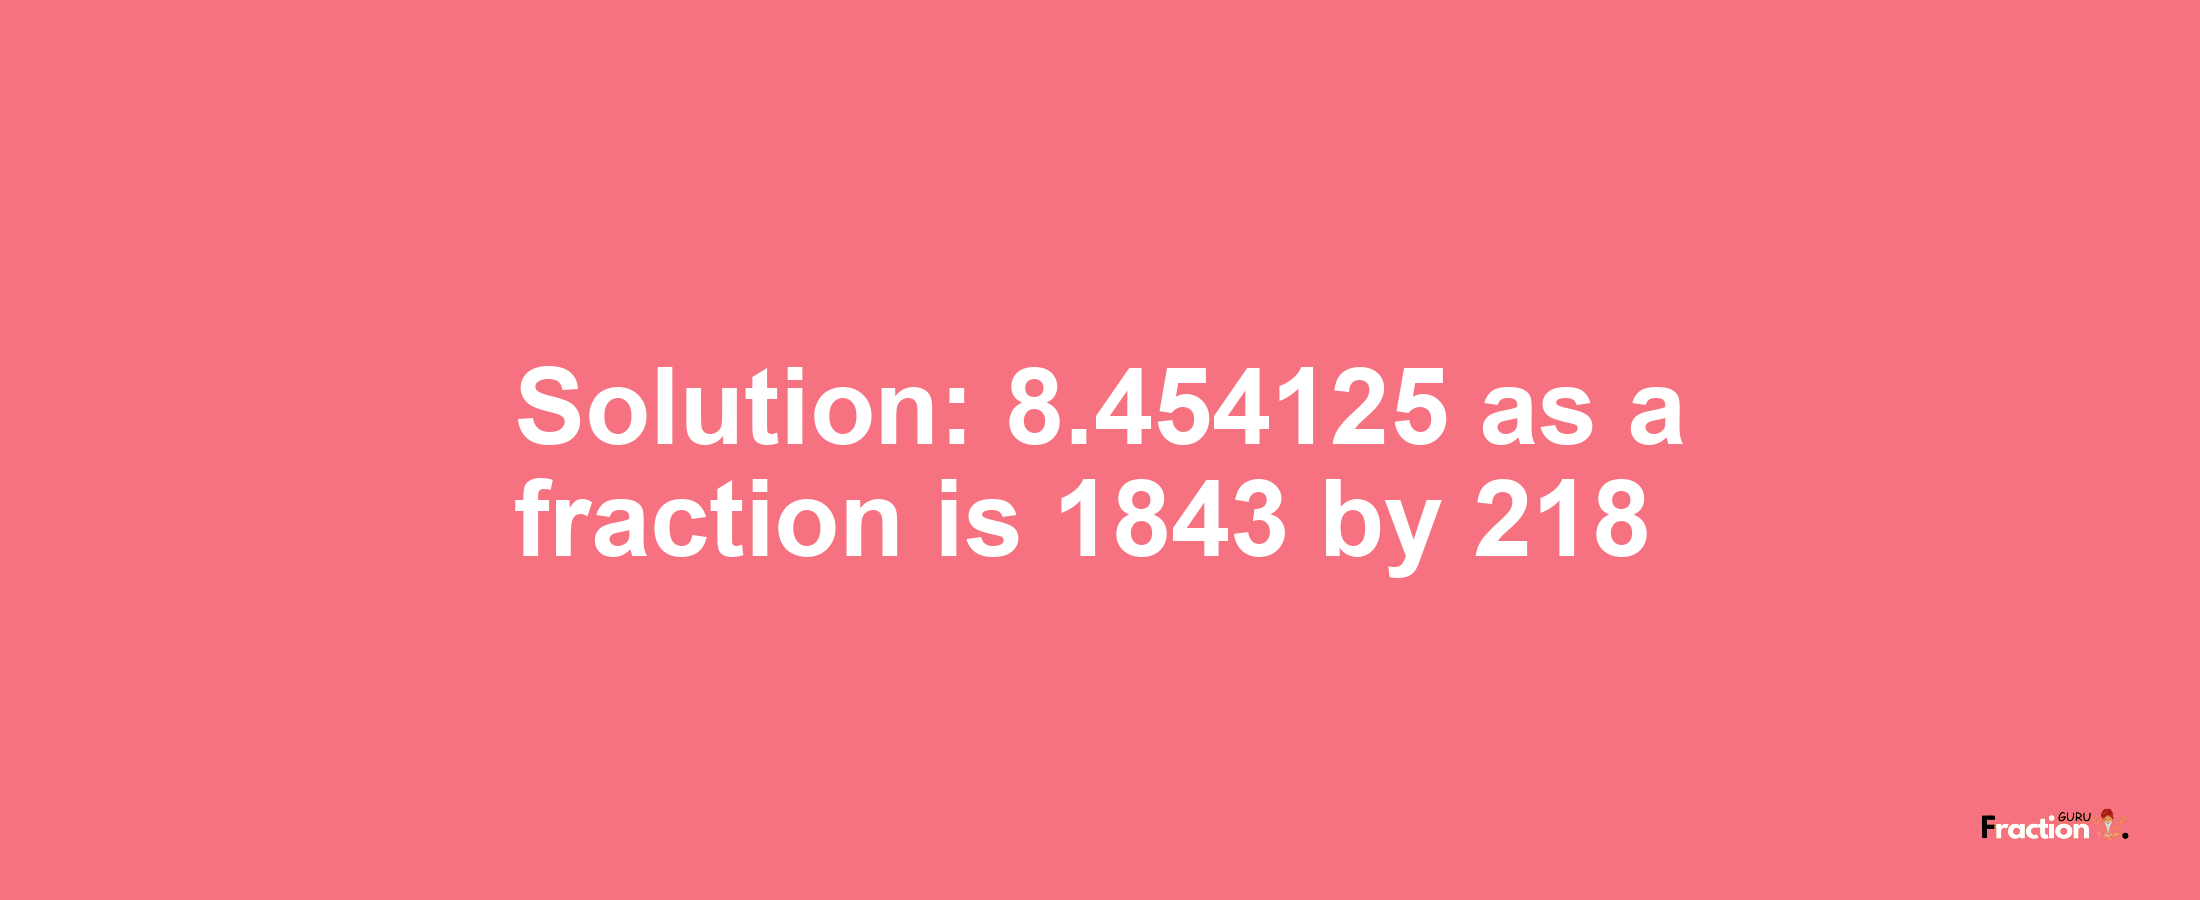 Solution:8.454125 as a fraction is 1843/218